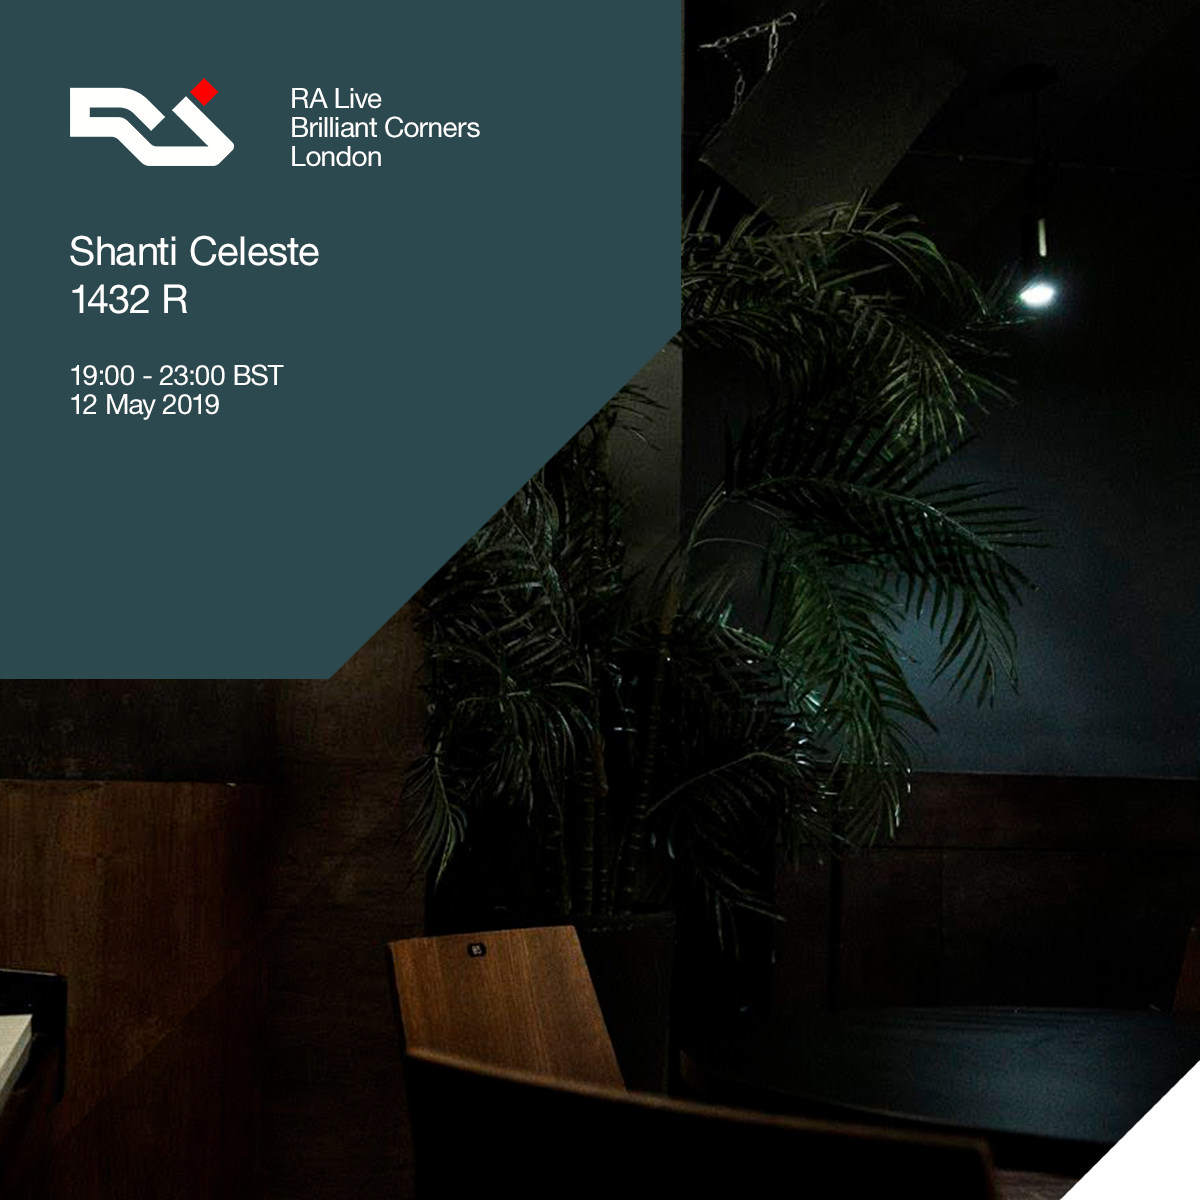 Shanti Celeste and 1432 R to play RA Live at Brilliant Corners image